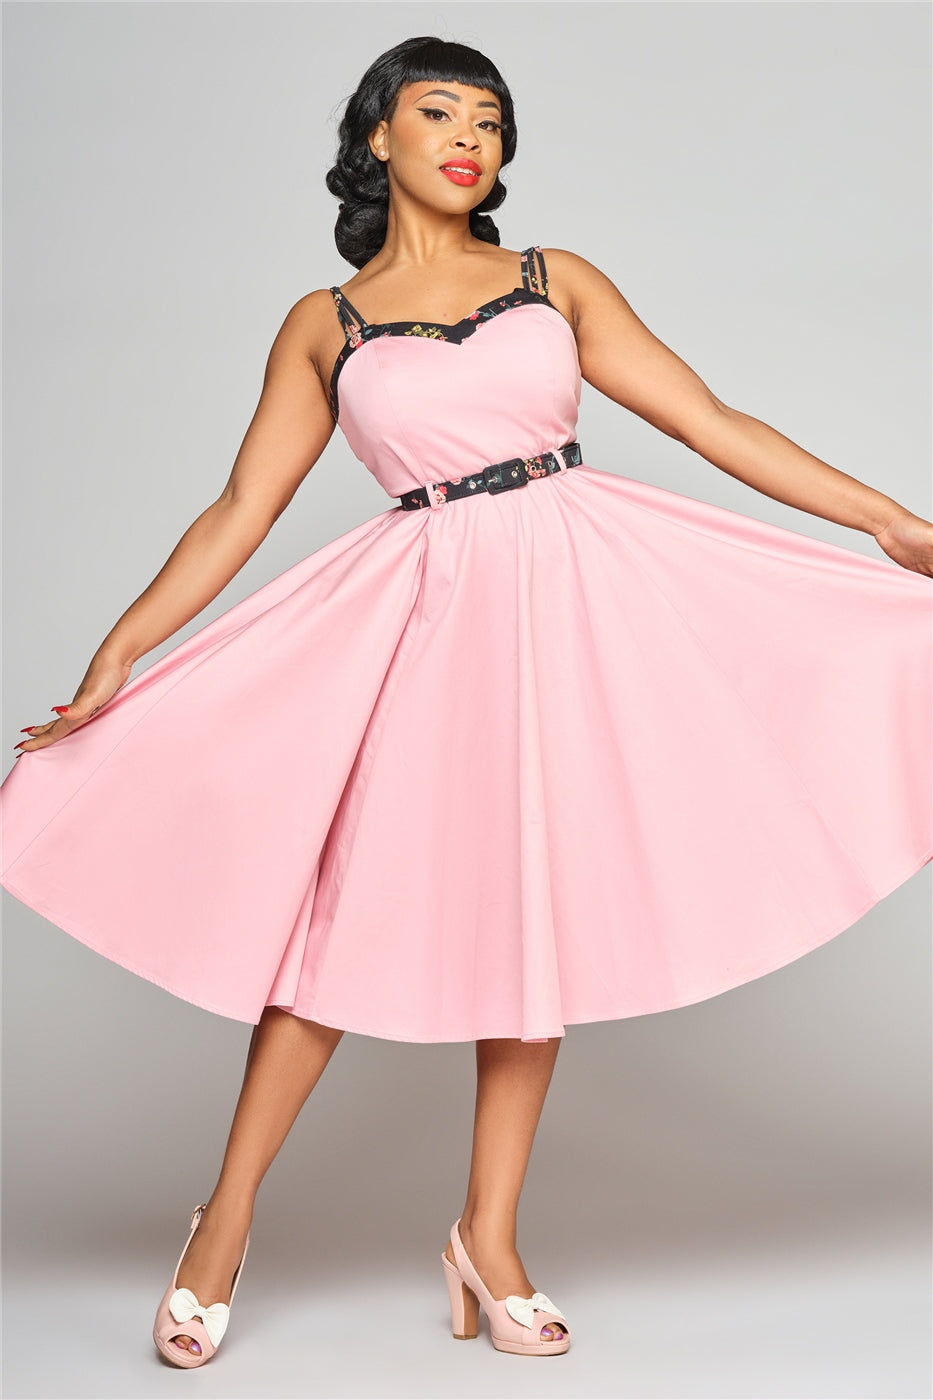 Beautiful dark haired woman standing holding out the skirt of her 50s style pink dress.